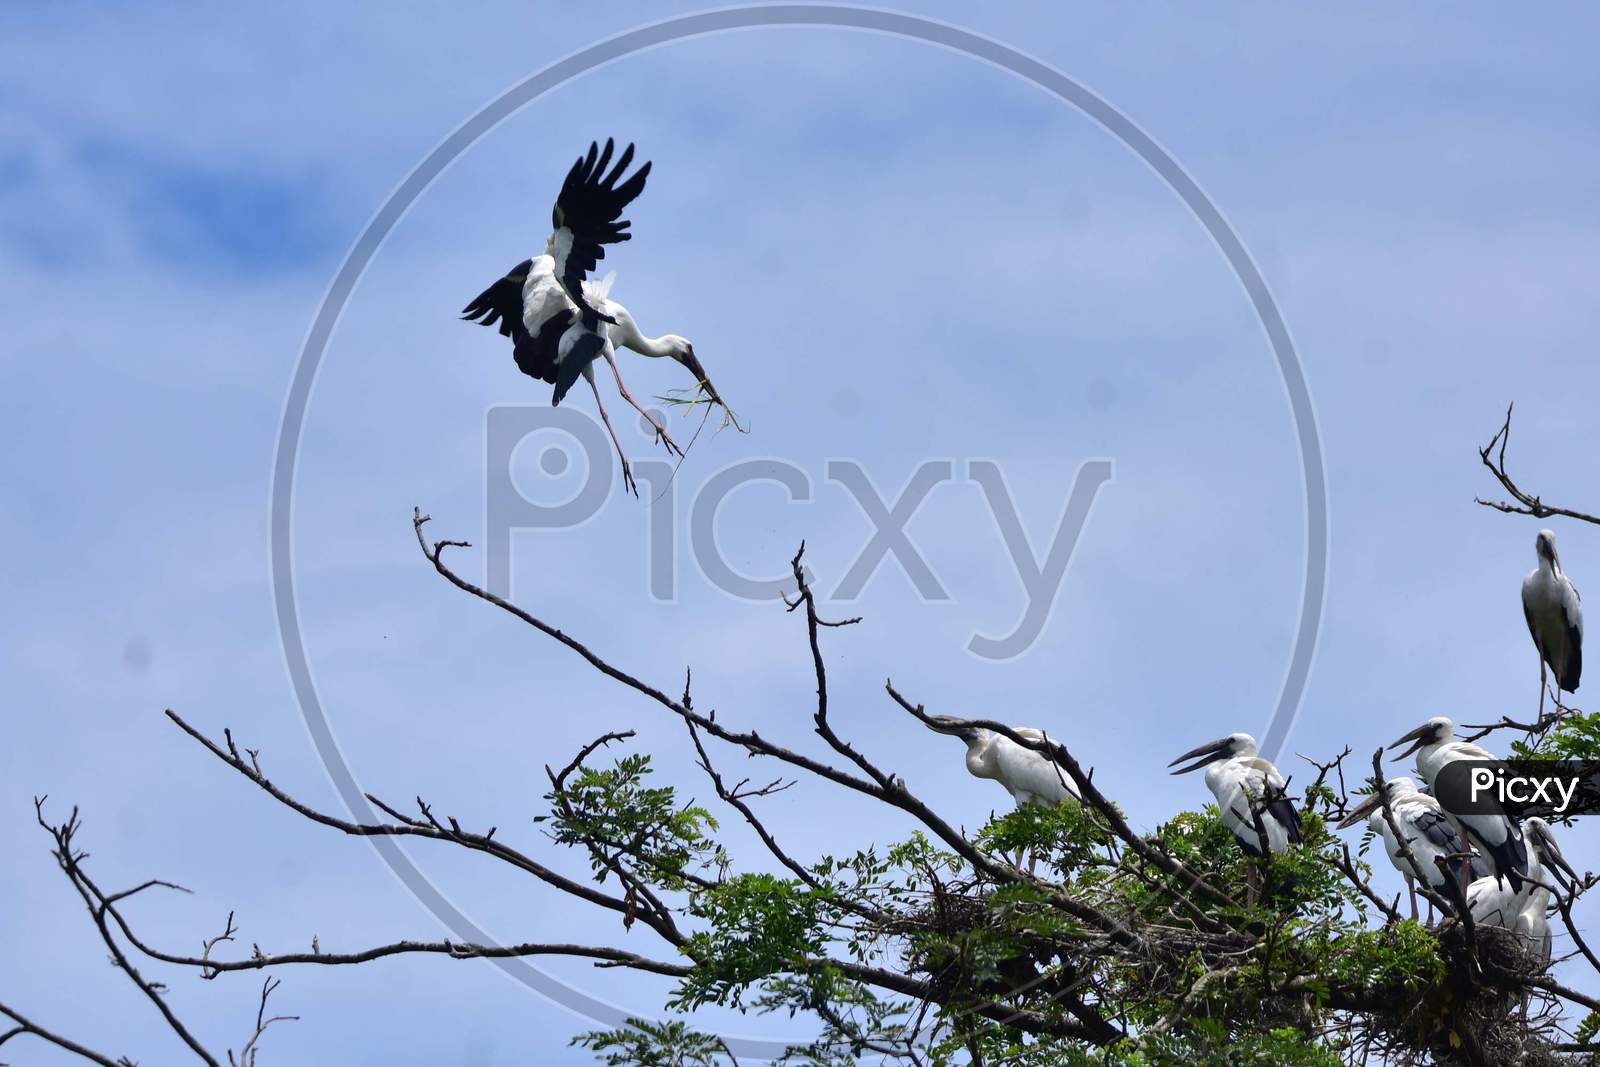 Openbill Storks Are Seen Perched On Top Of A Tree As They Arrive To Nest And Breed During The Monsoon Season, In Nagaon District Of Assam On June 19, 2020